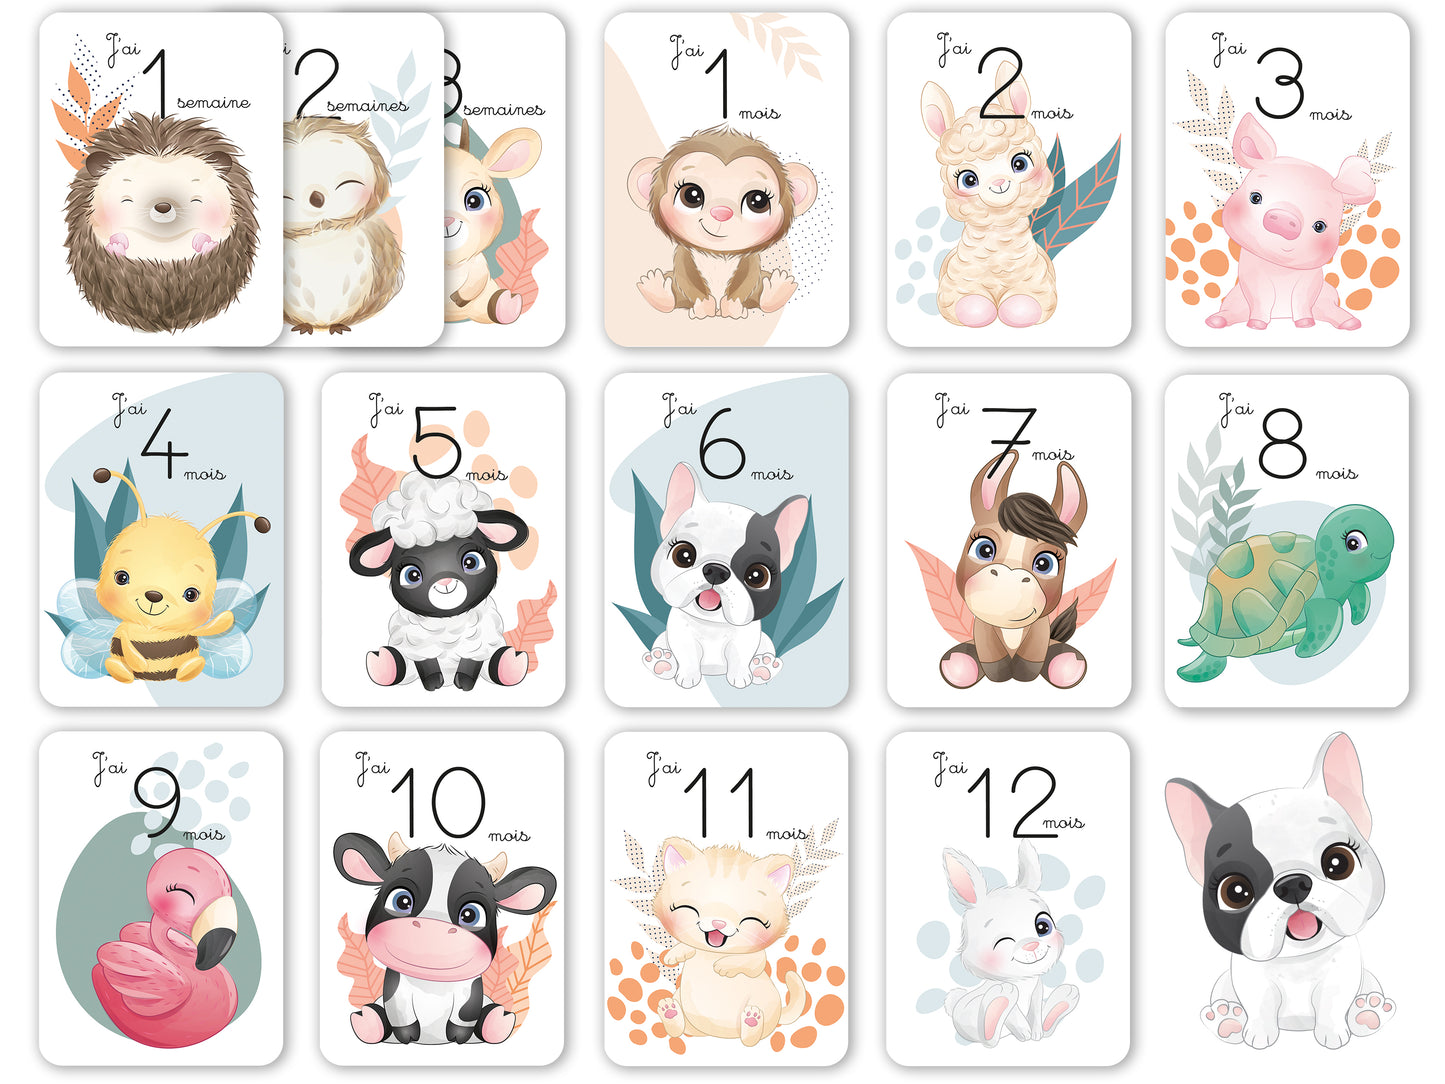 Stages card - 1 week 12 months - Cute jungle forest animals 0 1 year